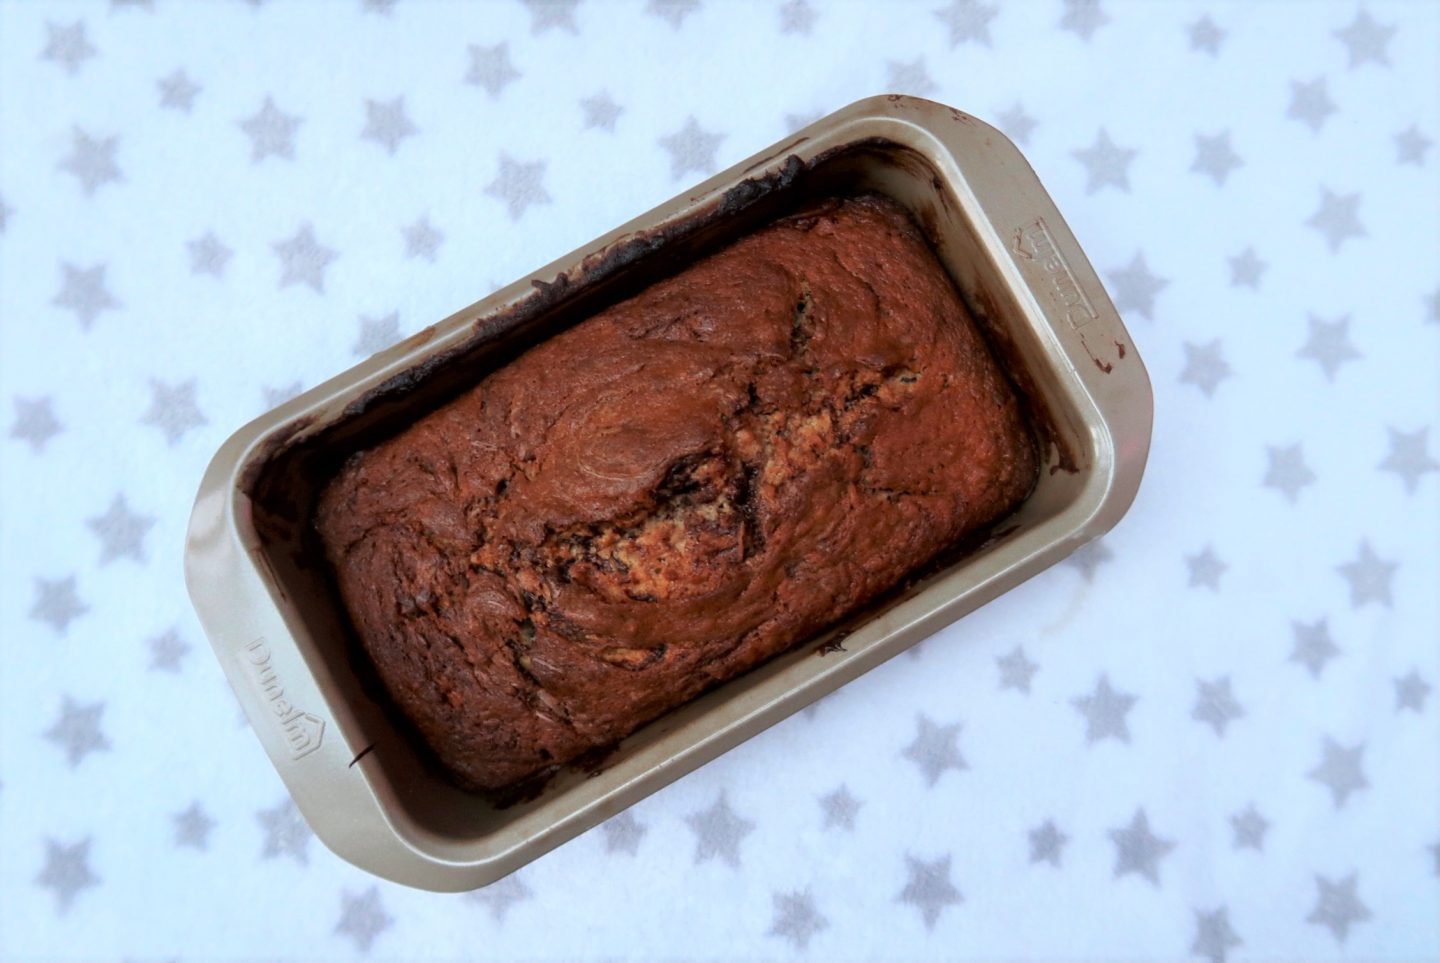 Baked easy banana cake with chocolate spread